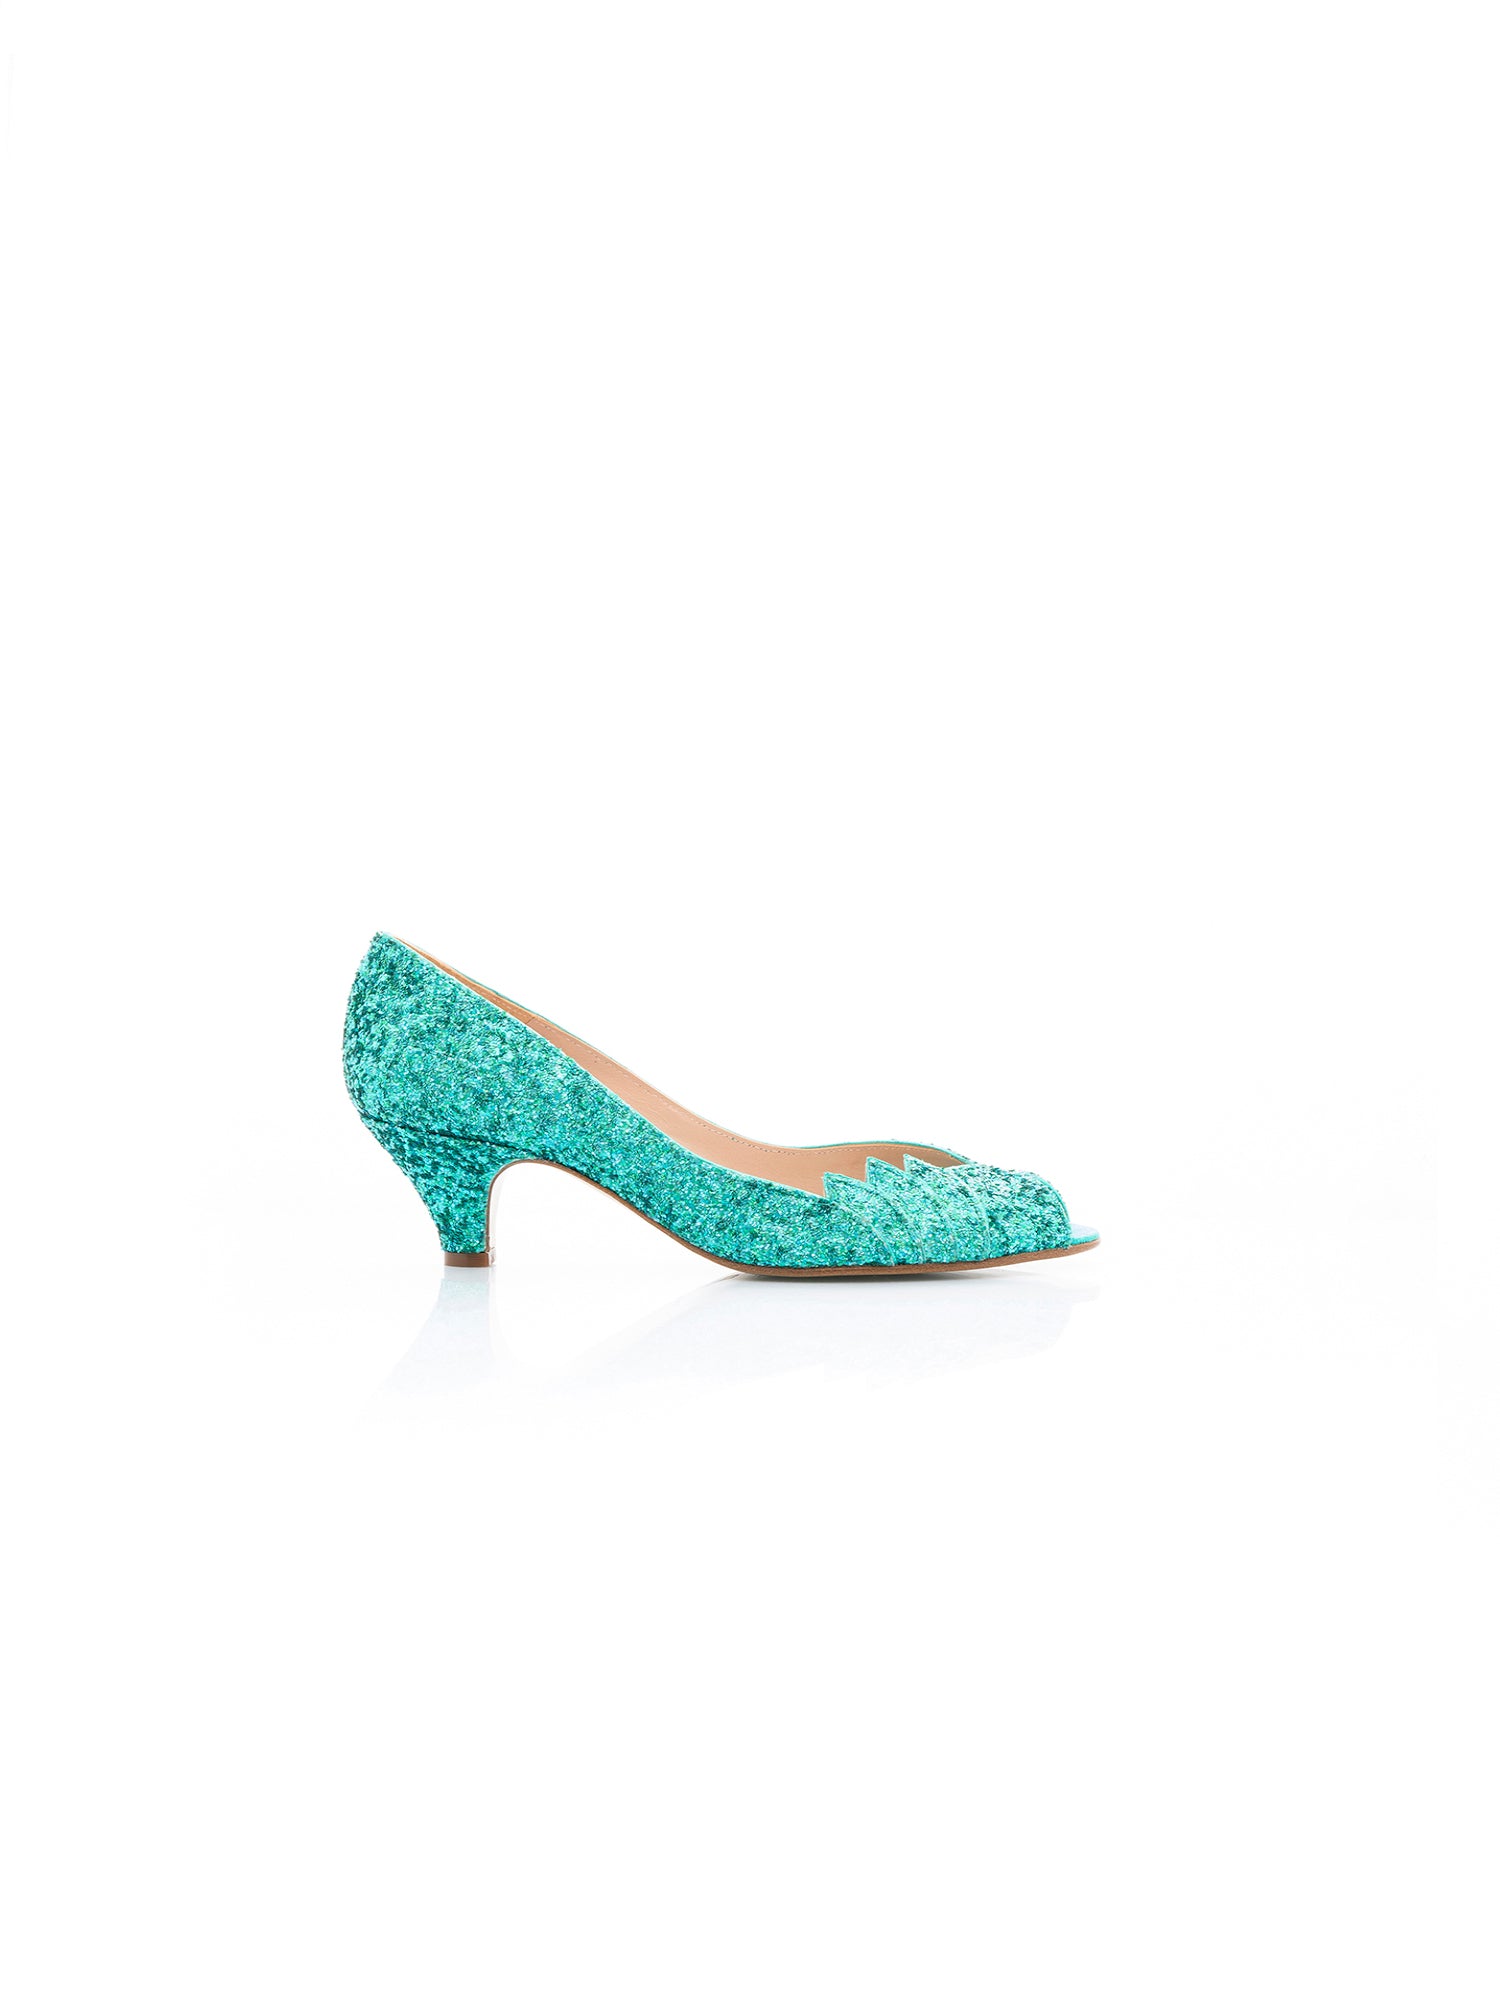 Small heel glitter turquoise pump Cocotte - Patricia Blanchet